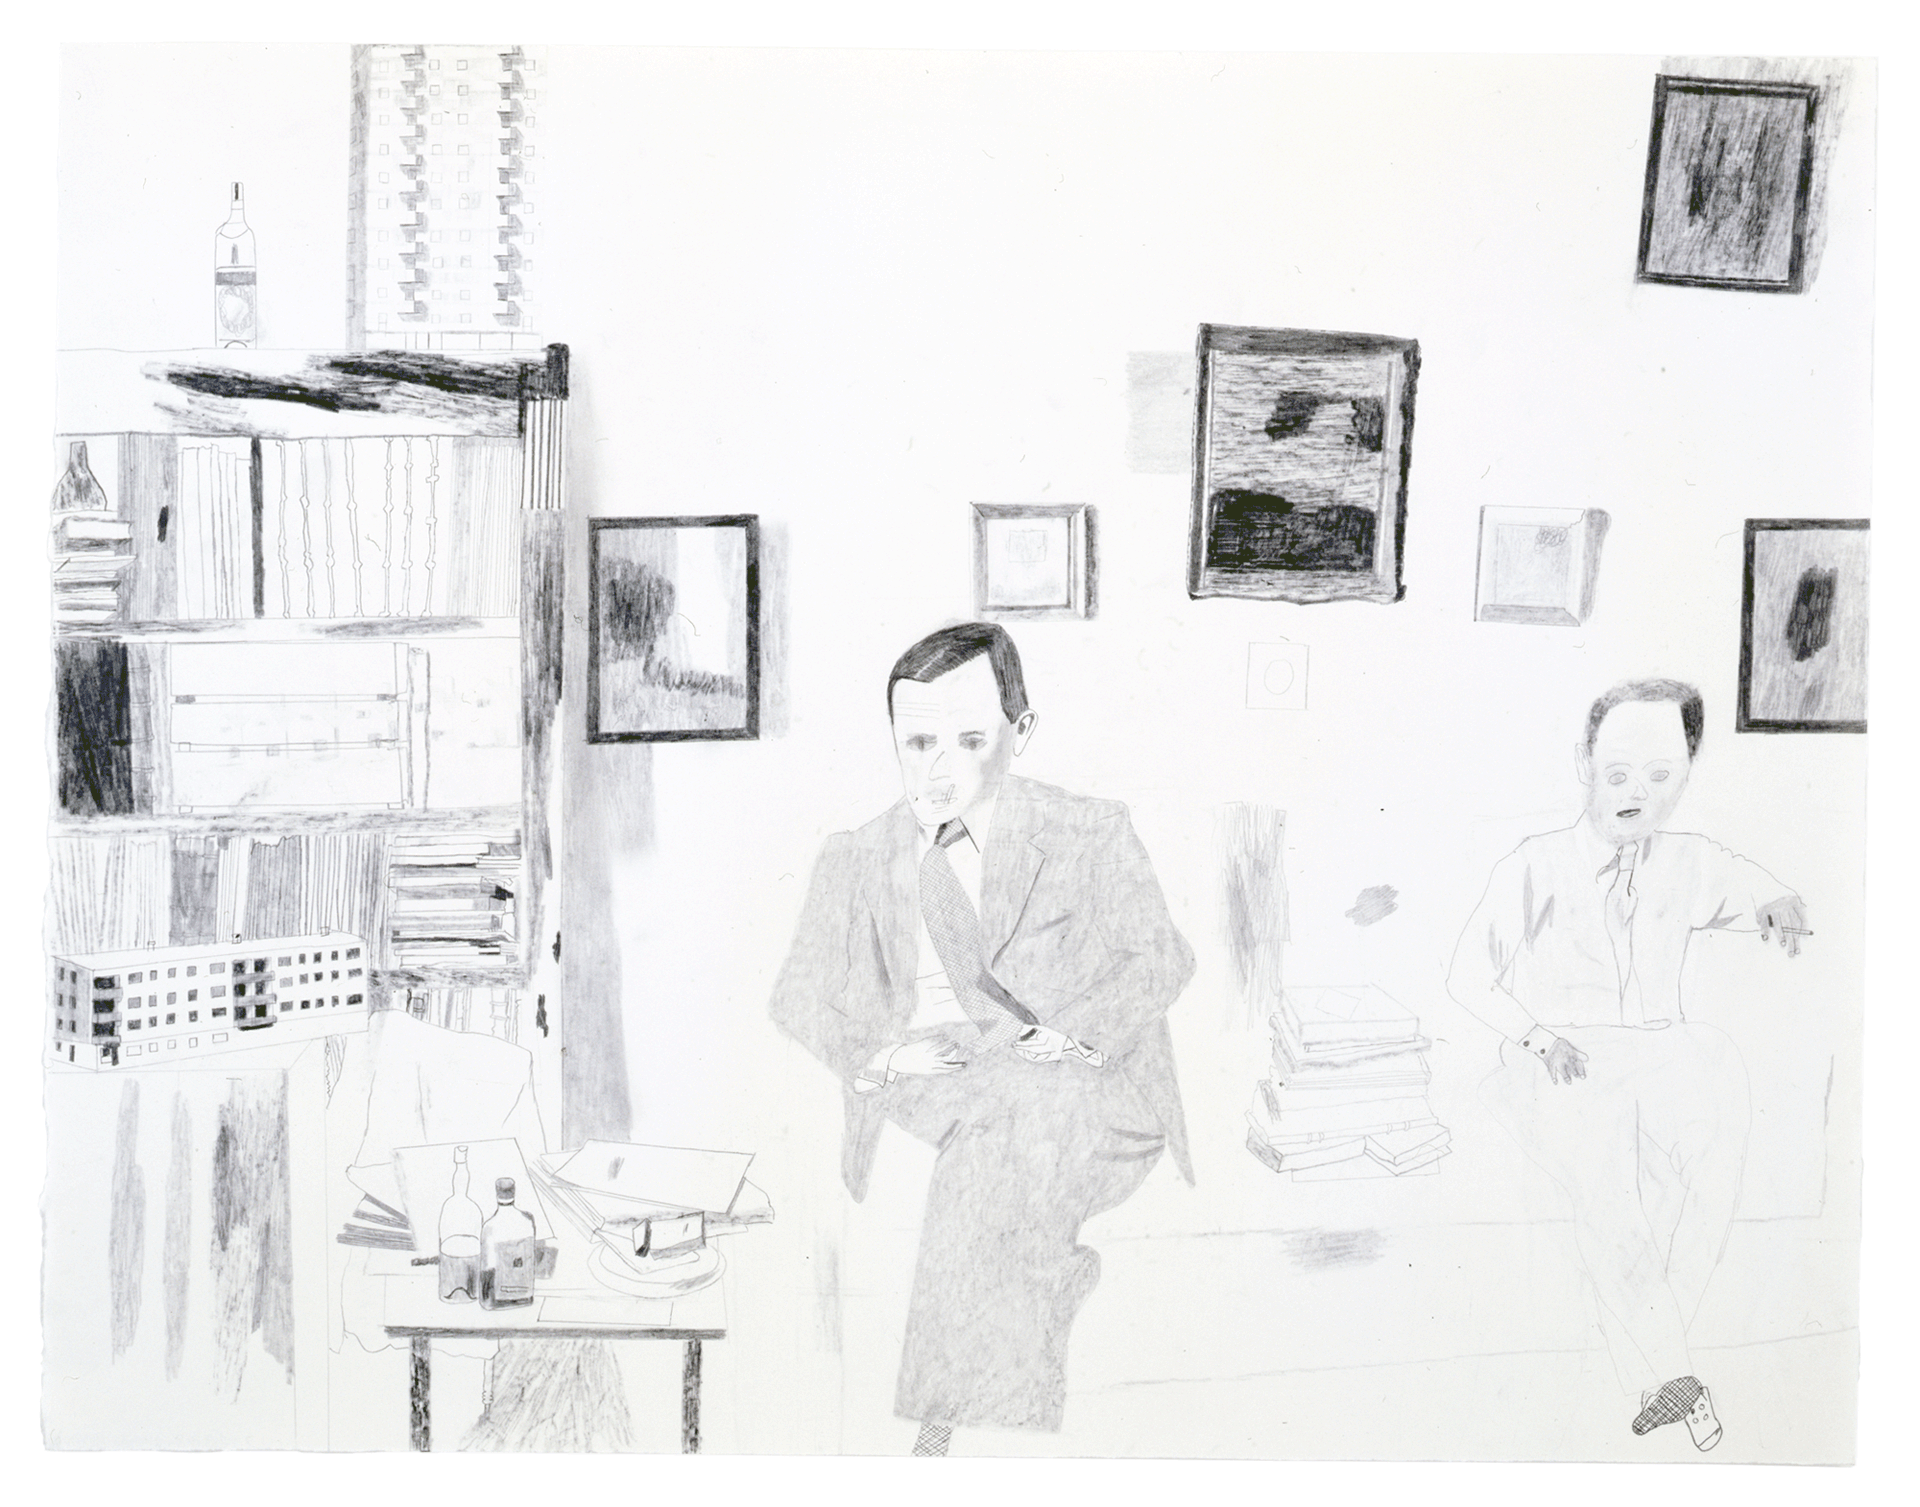 A work on paper by Jockum Nordstr√∂m, titled The Runt and the Pawn, dated 2005